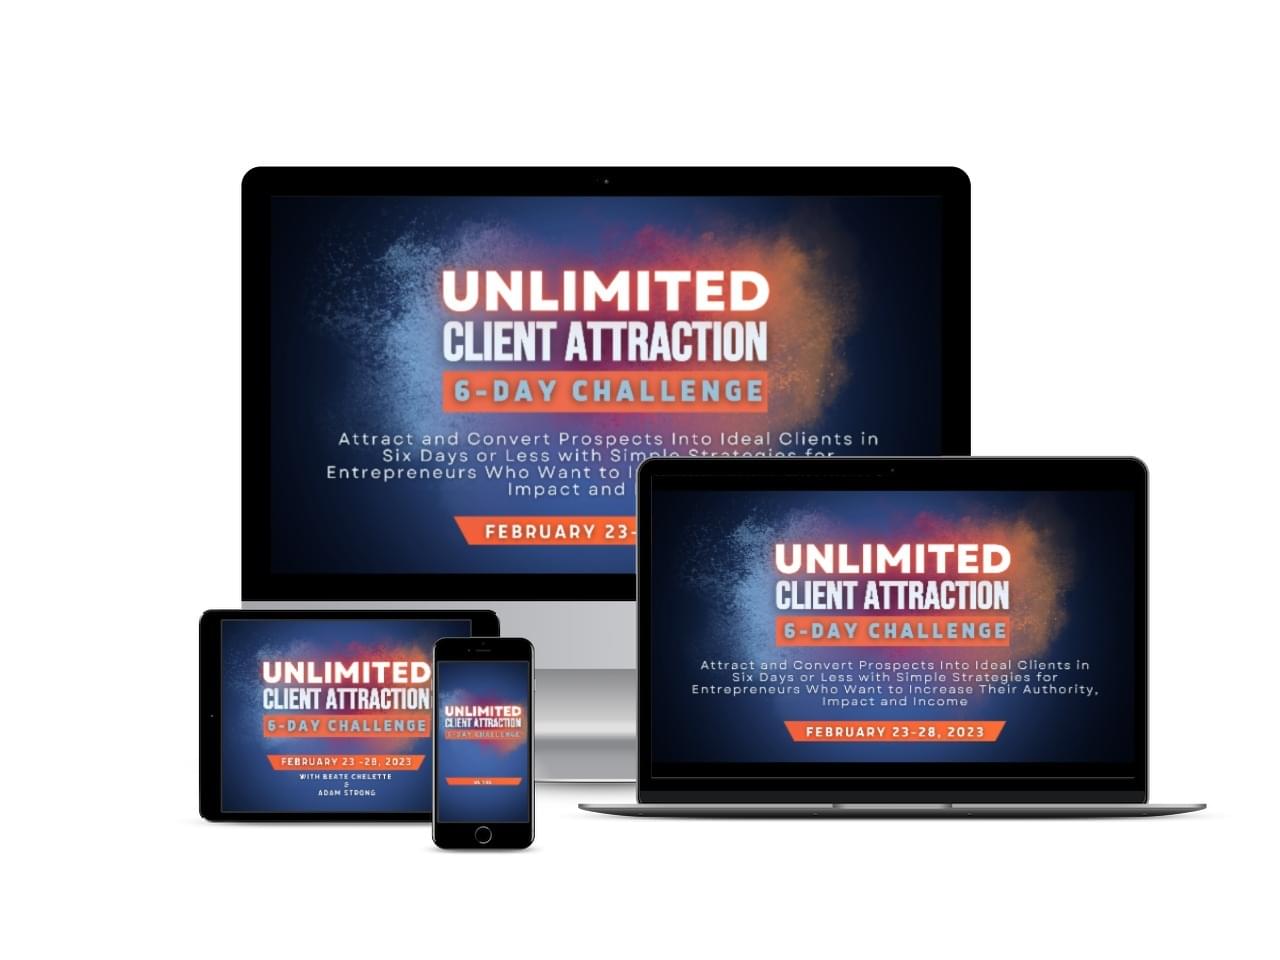 The Unlimited client attraction challenge almost free option